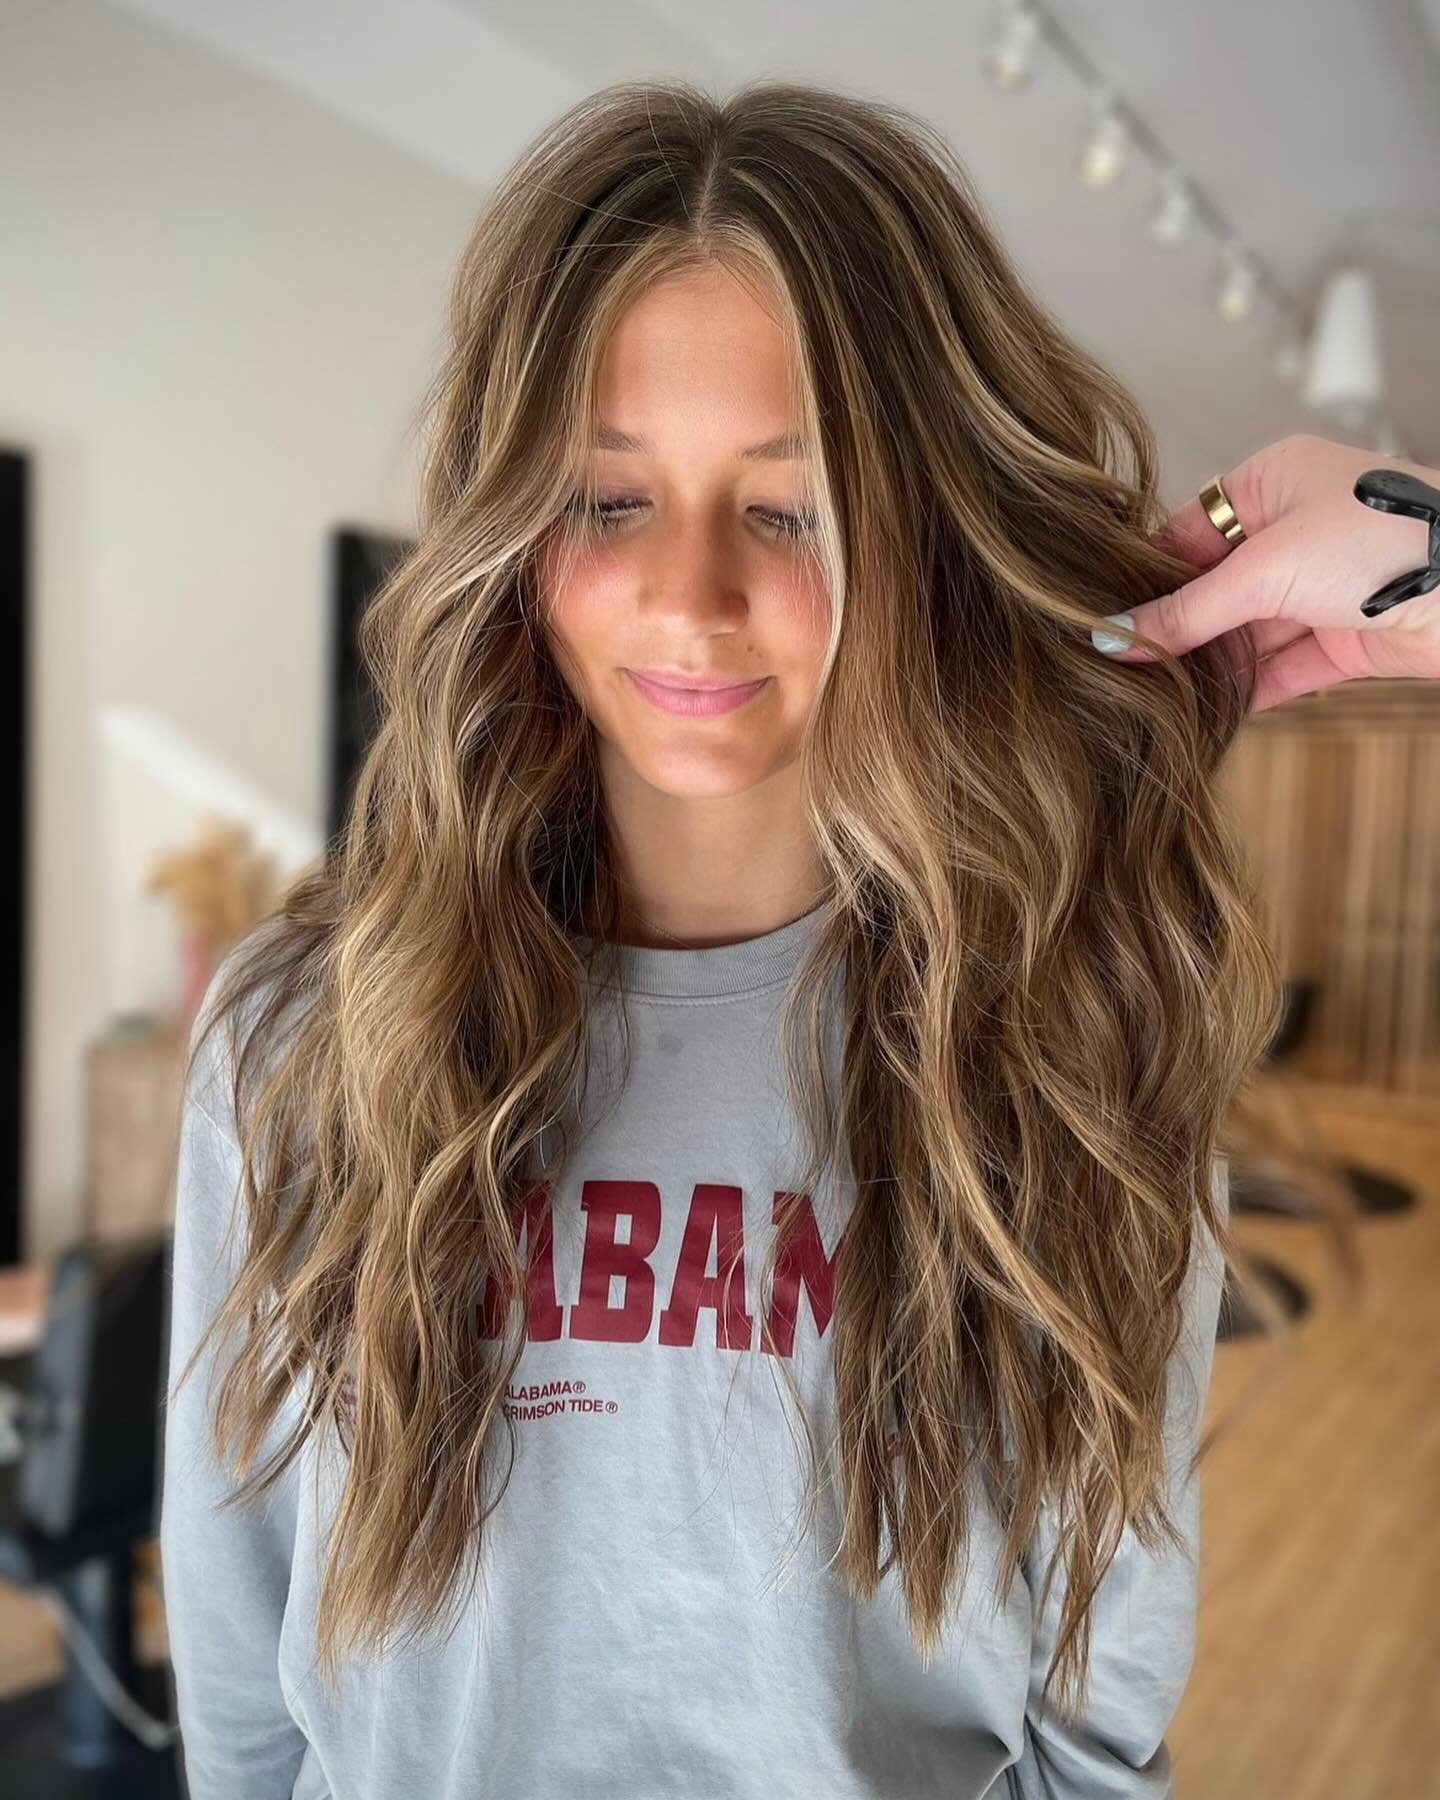 Lucy is killin' it at her bronde game 😜
&bull;
@leftyylucyy 
&bull;
&bull;
&bull;
&bull;
#downtownwheaton #wheatonsalon #wheatonmoms #wheatoncollege #wheatonnorth #glenbardwest #napervillemoms #wheatonliving #glenellynliving #glenellynmomsvillage #g